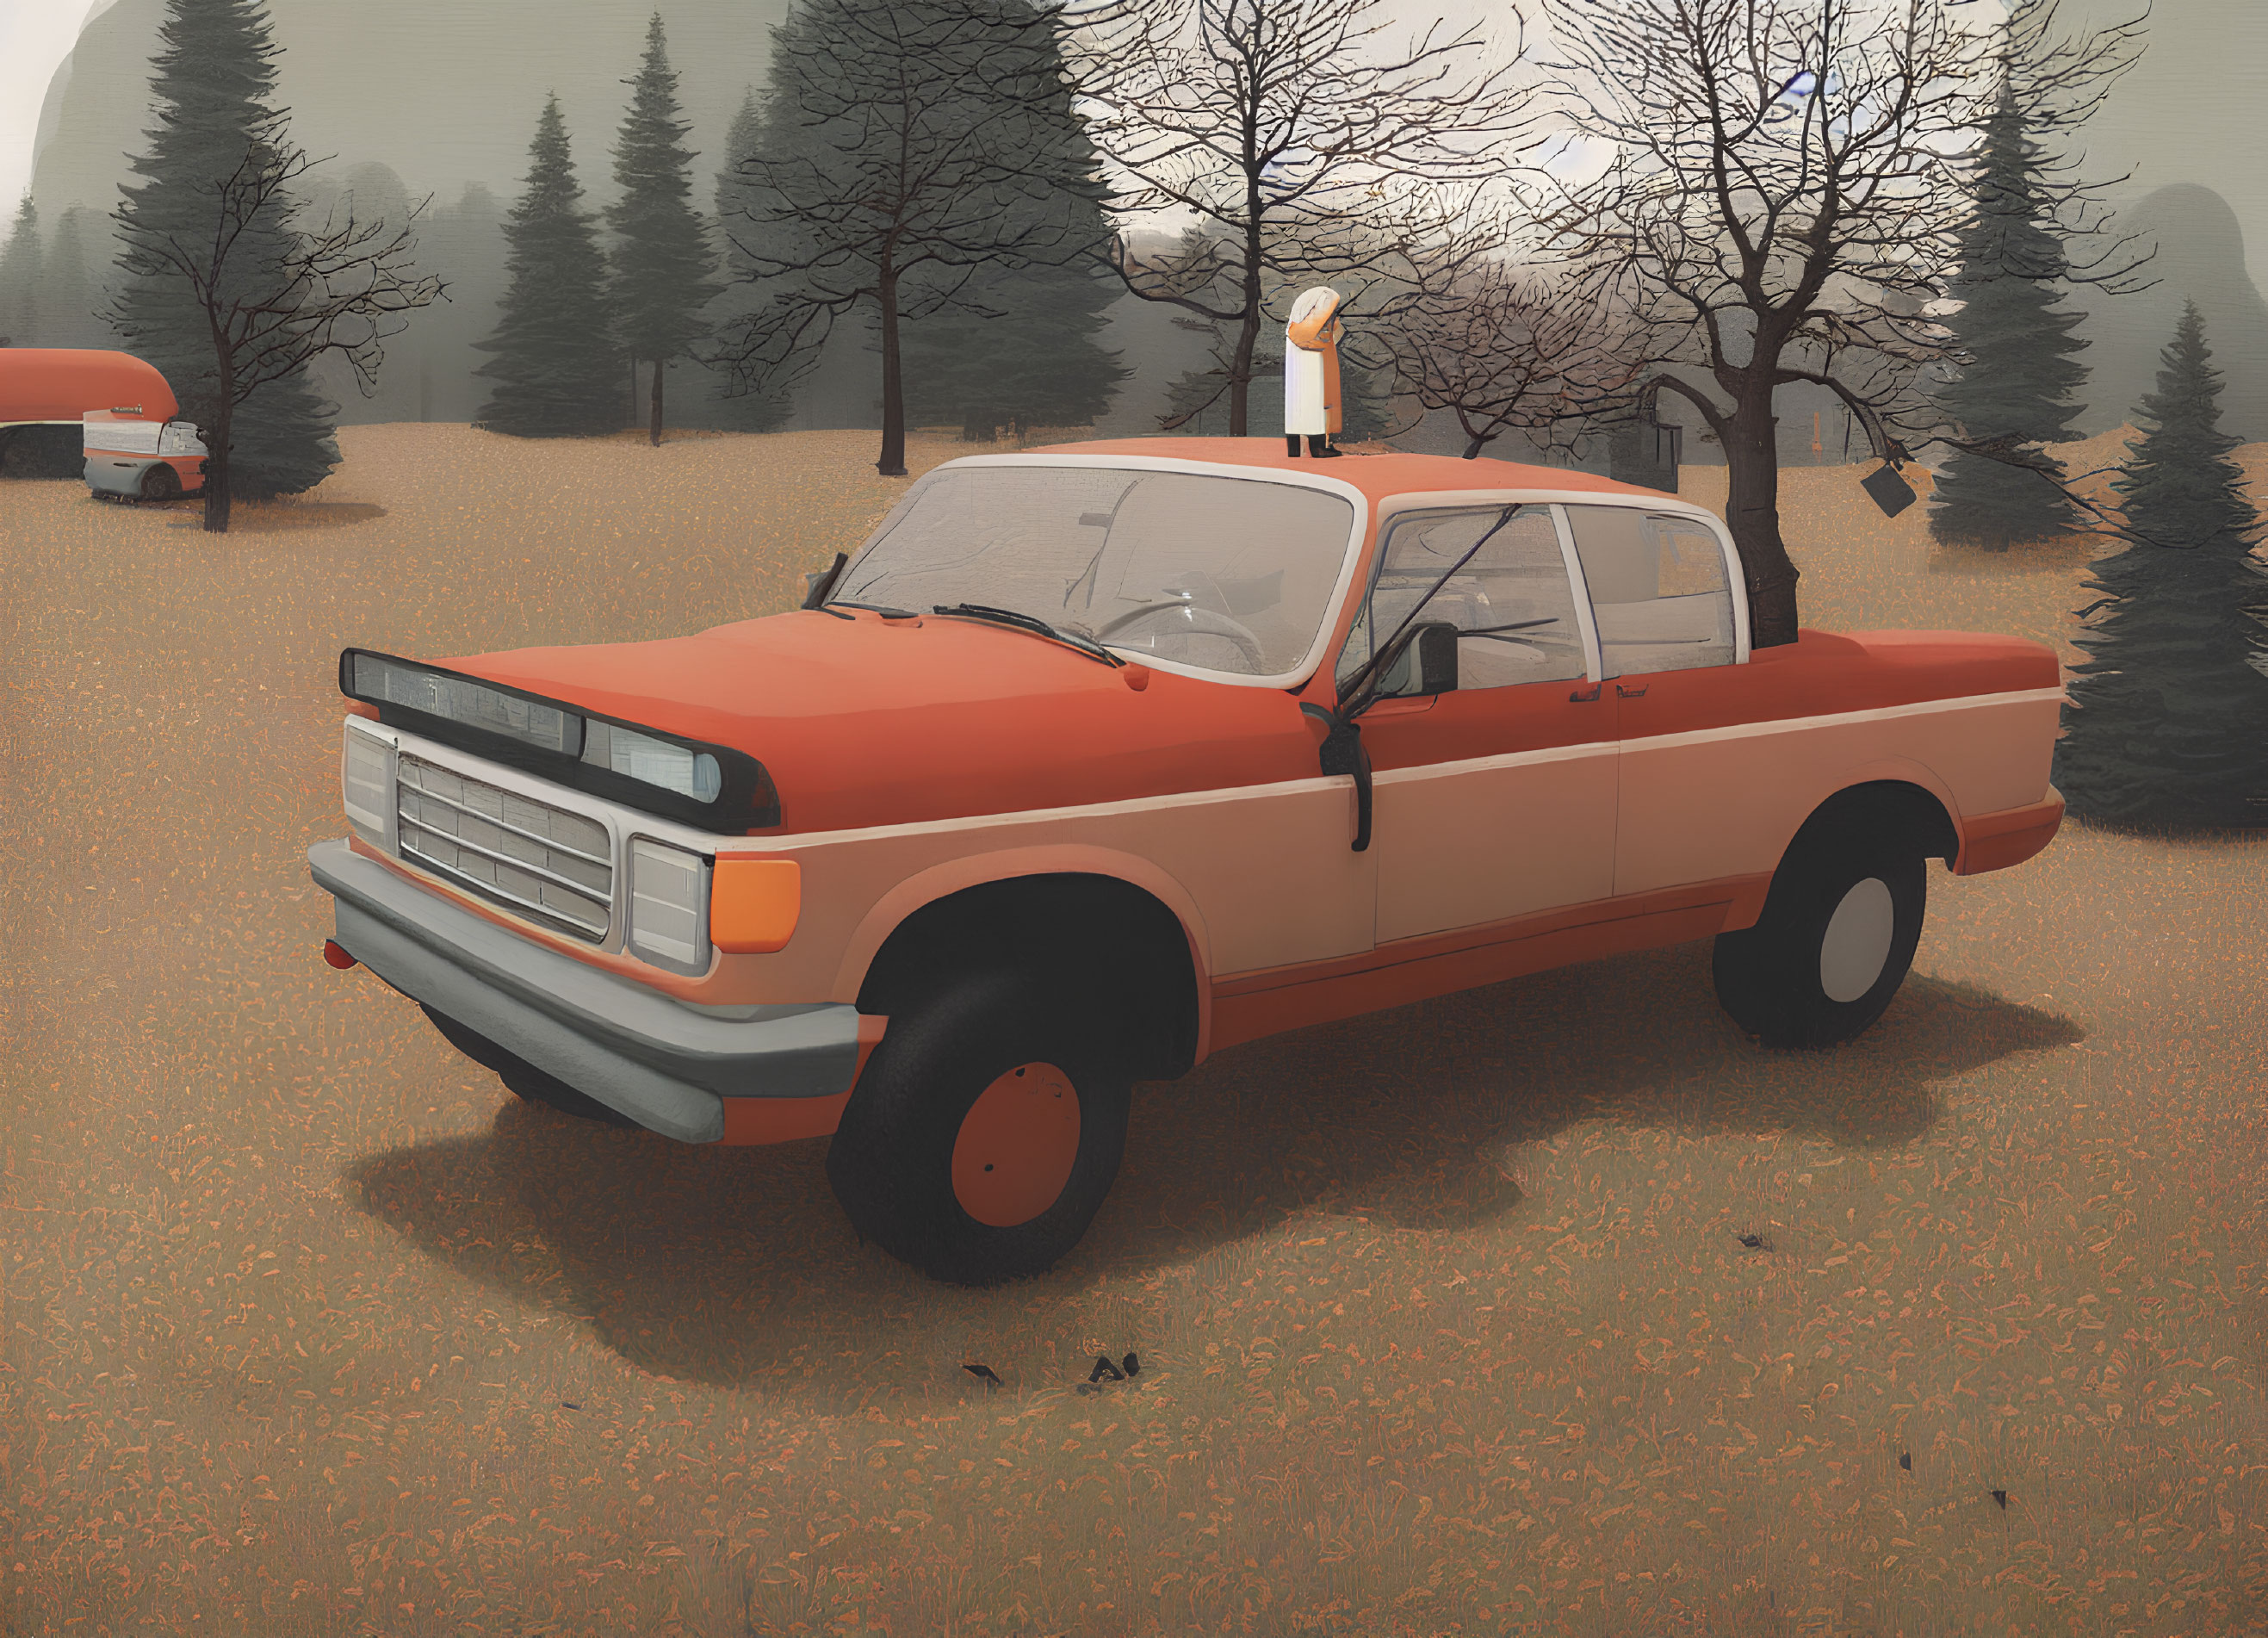 Vintage orange pickup truck in misty autumn forest with bare trees.